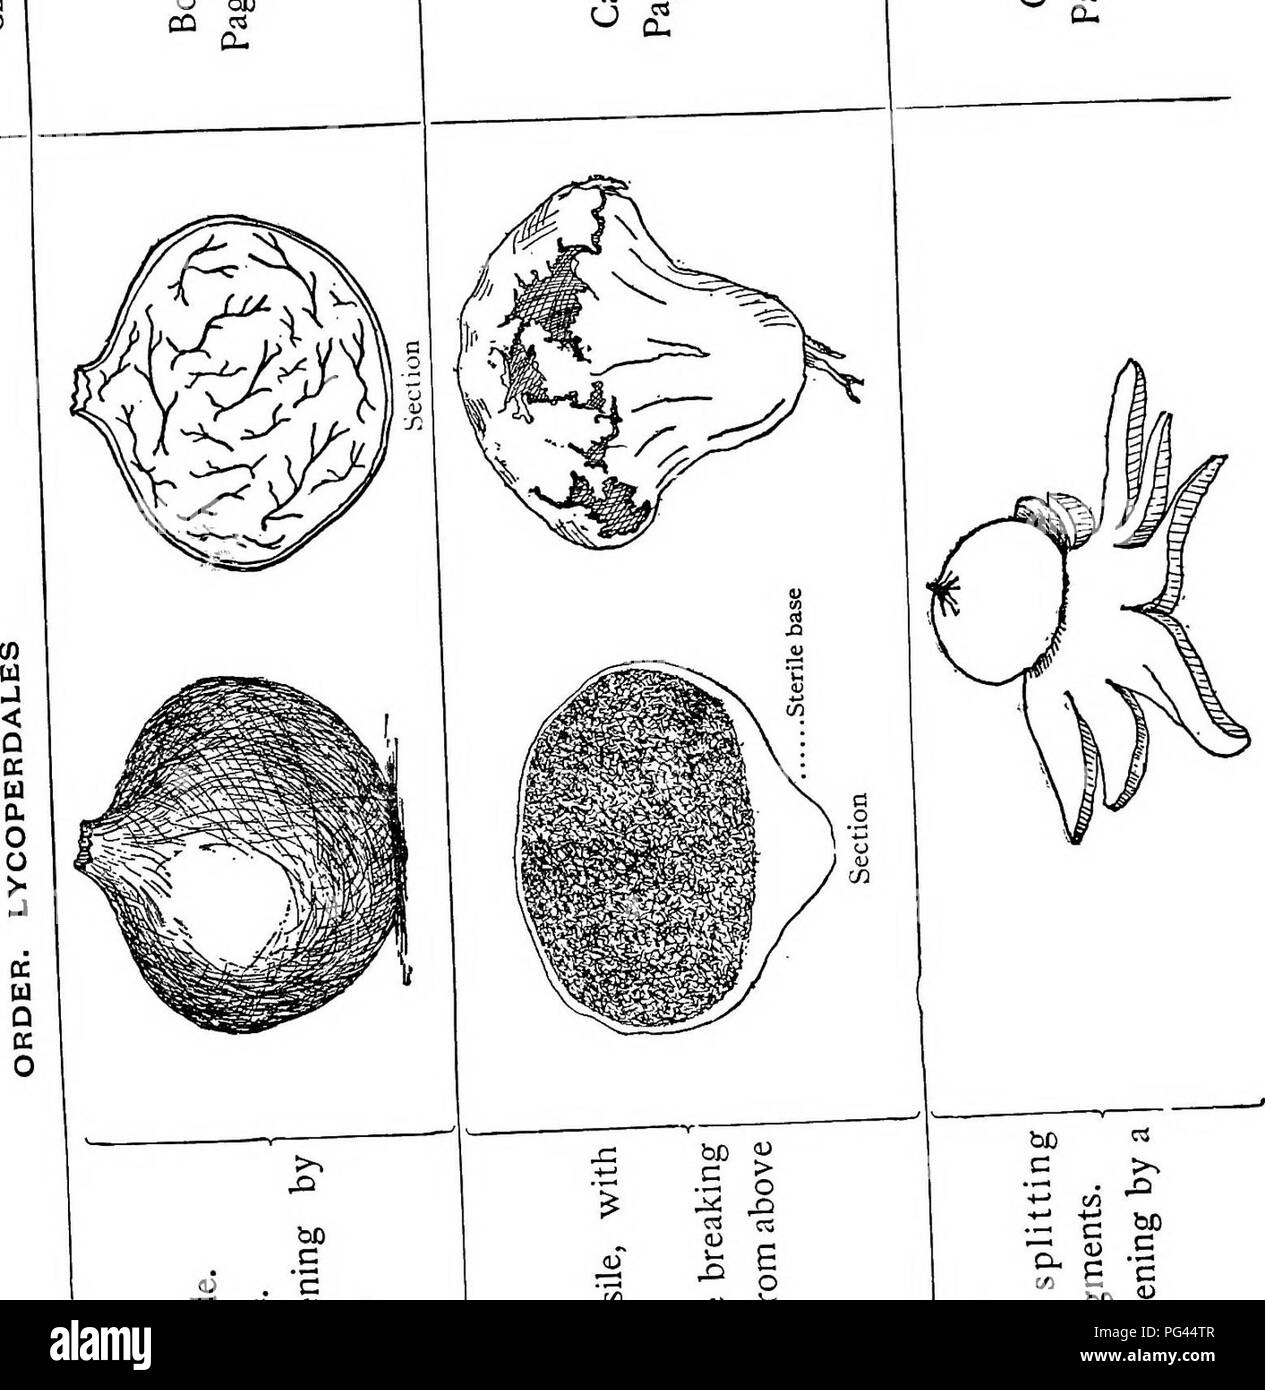 . The mushroom book. A popular guide to the identification and study of our commoner Fungi, with special emphasis on the edible varieties. Mushrooms; Cookery (Mushrooms); cbk. Key â¢ 00 Â«3 &lt;D a o m n CQ rt a- 0- . C a. â¢Â£ 3 ^ - -^ D S X3 -H 1-1 â 5 &amp;S o o E a. re C o E o E 3 &lt;a 28 8 Â« I- c D. '*- D o c o , 0^ tT) ri â 1-' cfl tÂ« D bO 0 C3 o.. bD rt C &gt;s +-&gt; e/5 â Q â¢*-' S bO C E c feX) a) a. C/3 0 E E 3 3 0 E t3 US T3 w a&gt; 0 c2i bO C C w. Please note that these images are extracted from scanned page images that may have been digitally enhanced for readability - colora Stock Photo